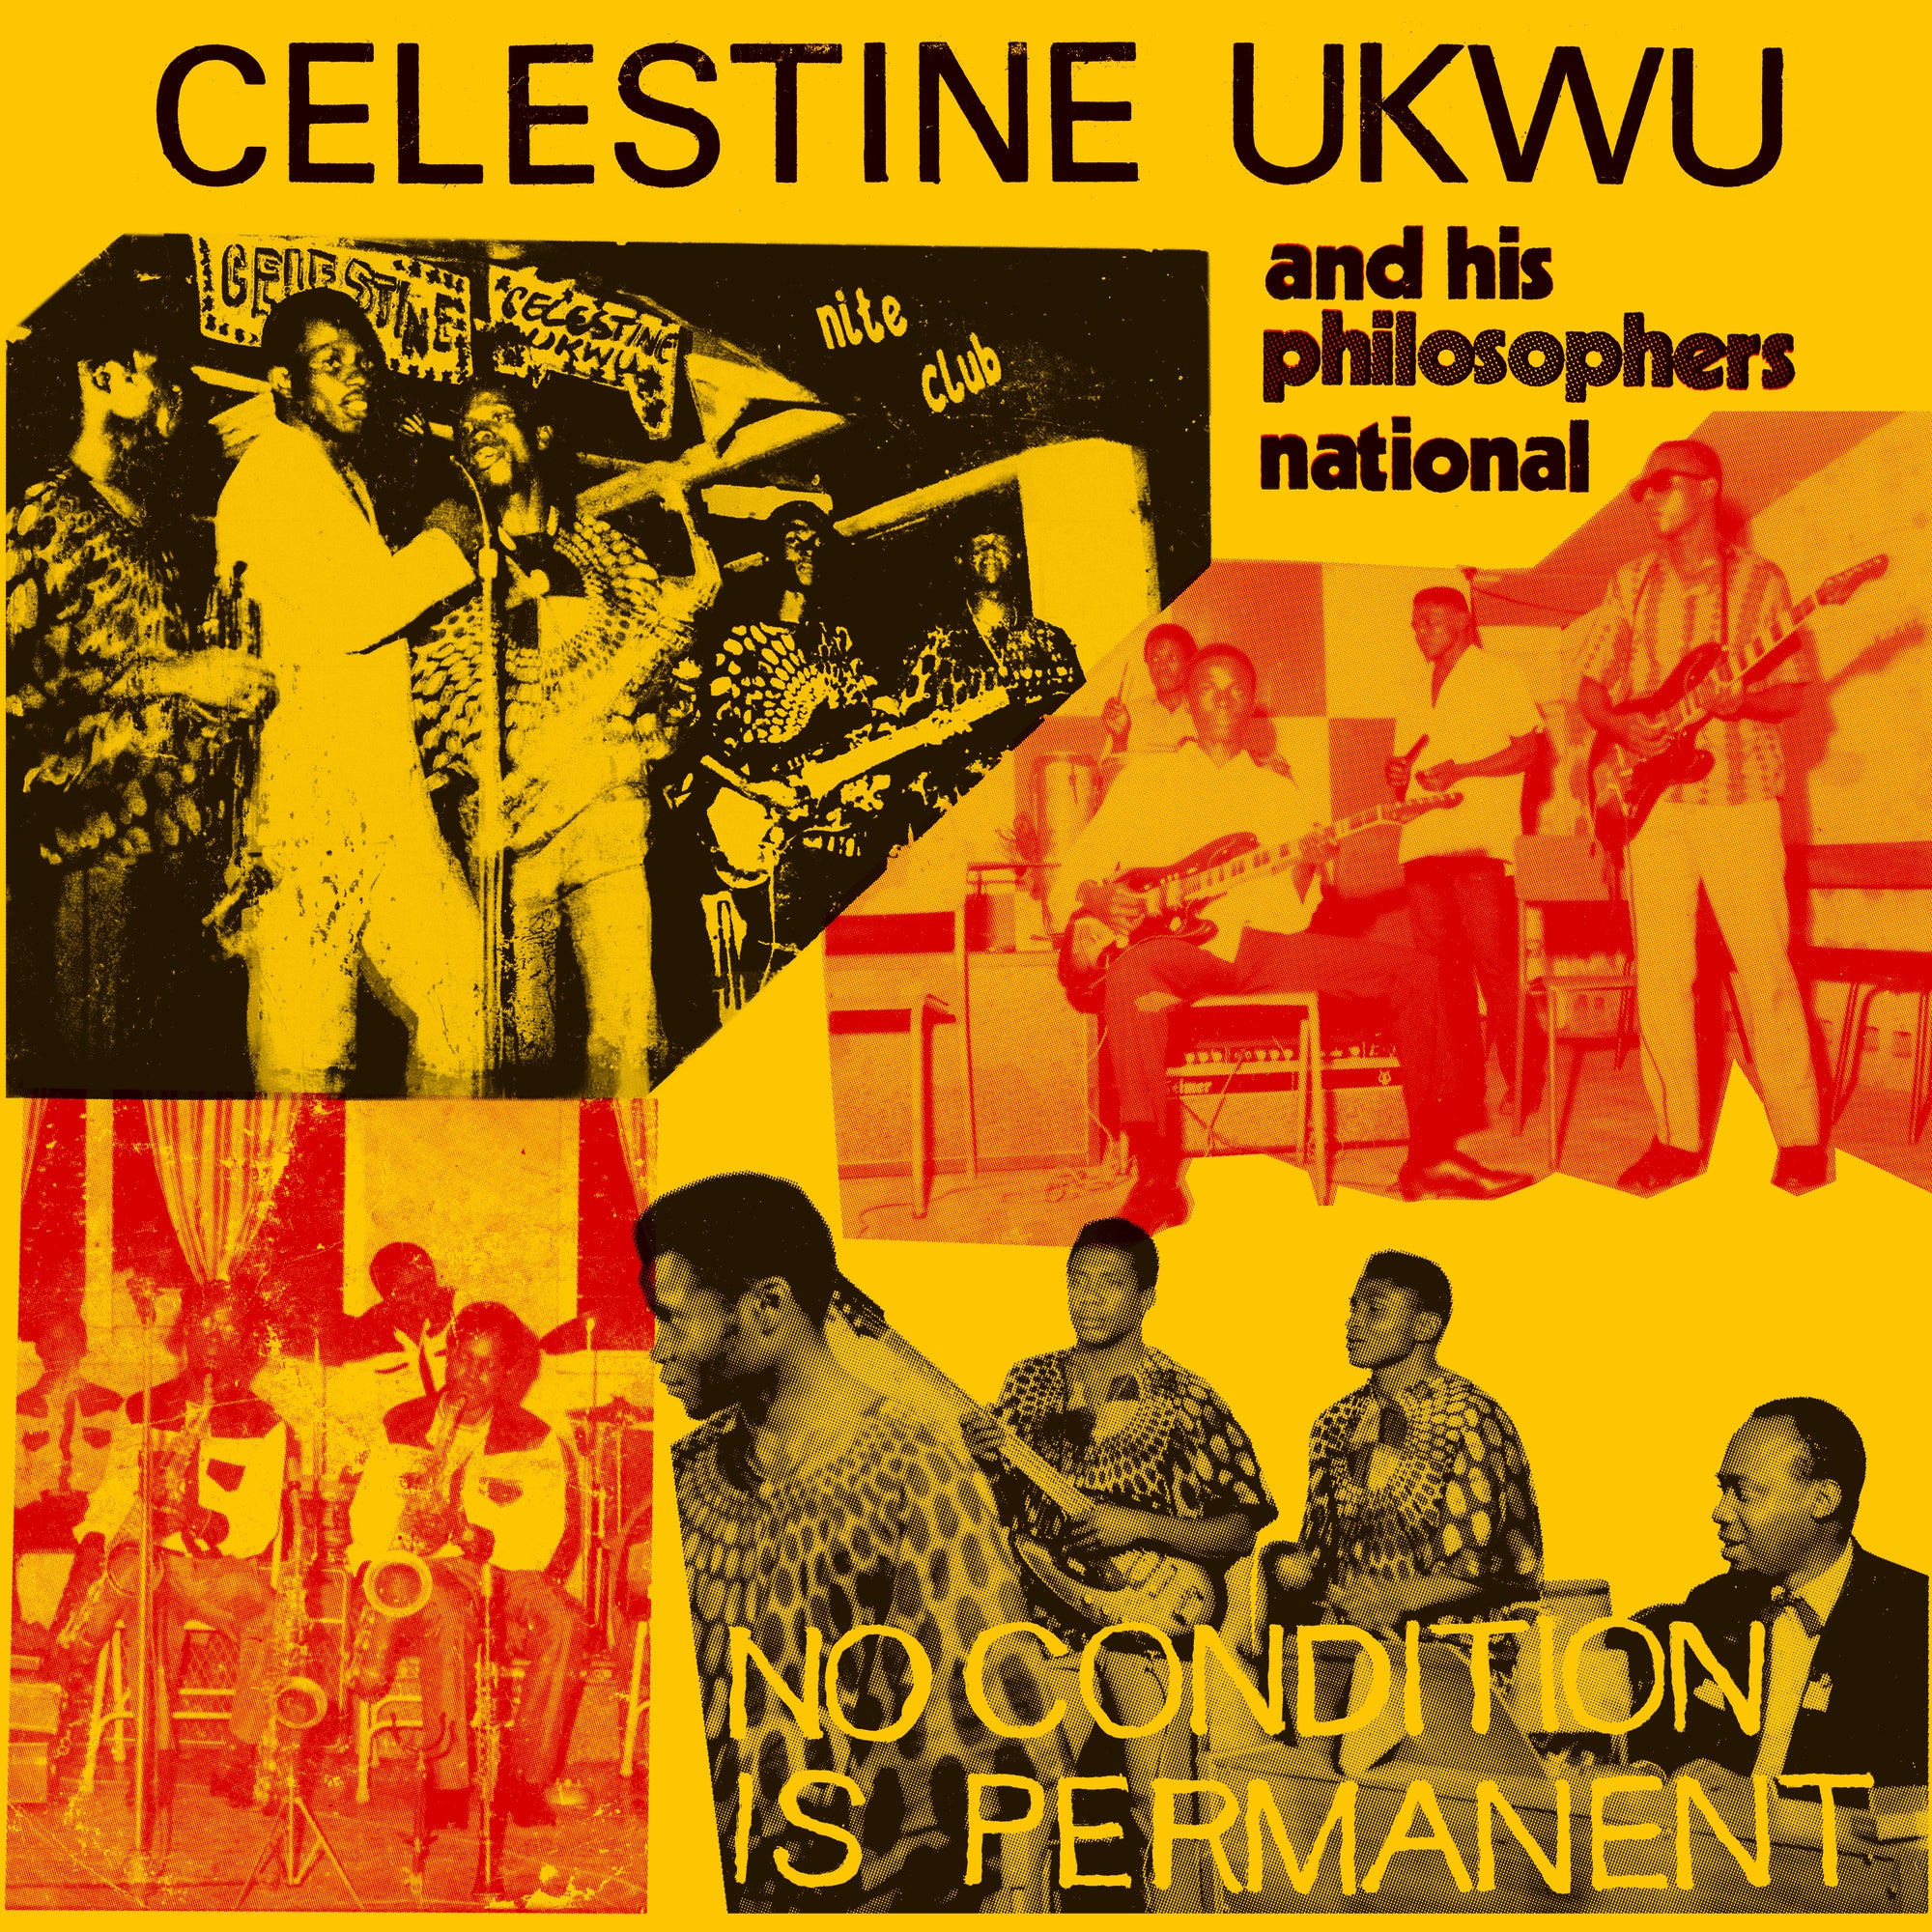 Album cover of "Celestine Ukwu - No Condition is Permanent by Tandem Coffee Roasters," featuring multiple vintage photographs of the band performing, overlaid with bold text and a vivid yellow background